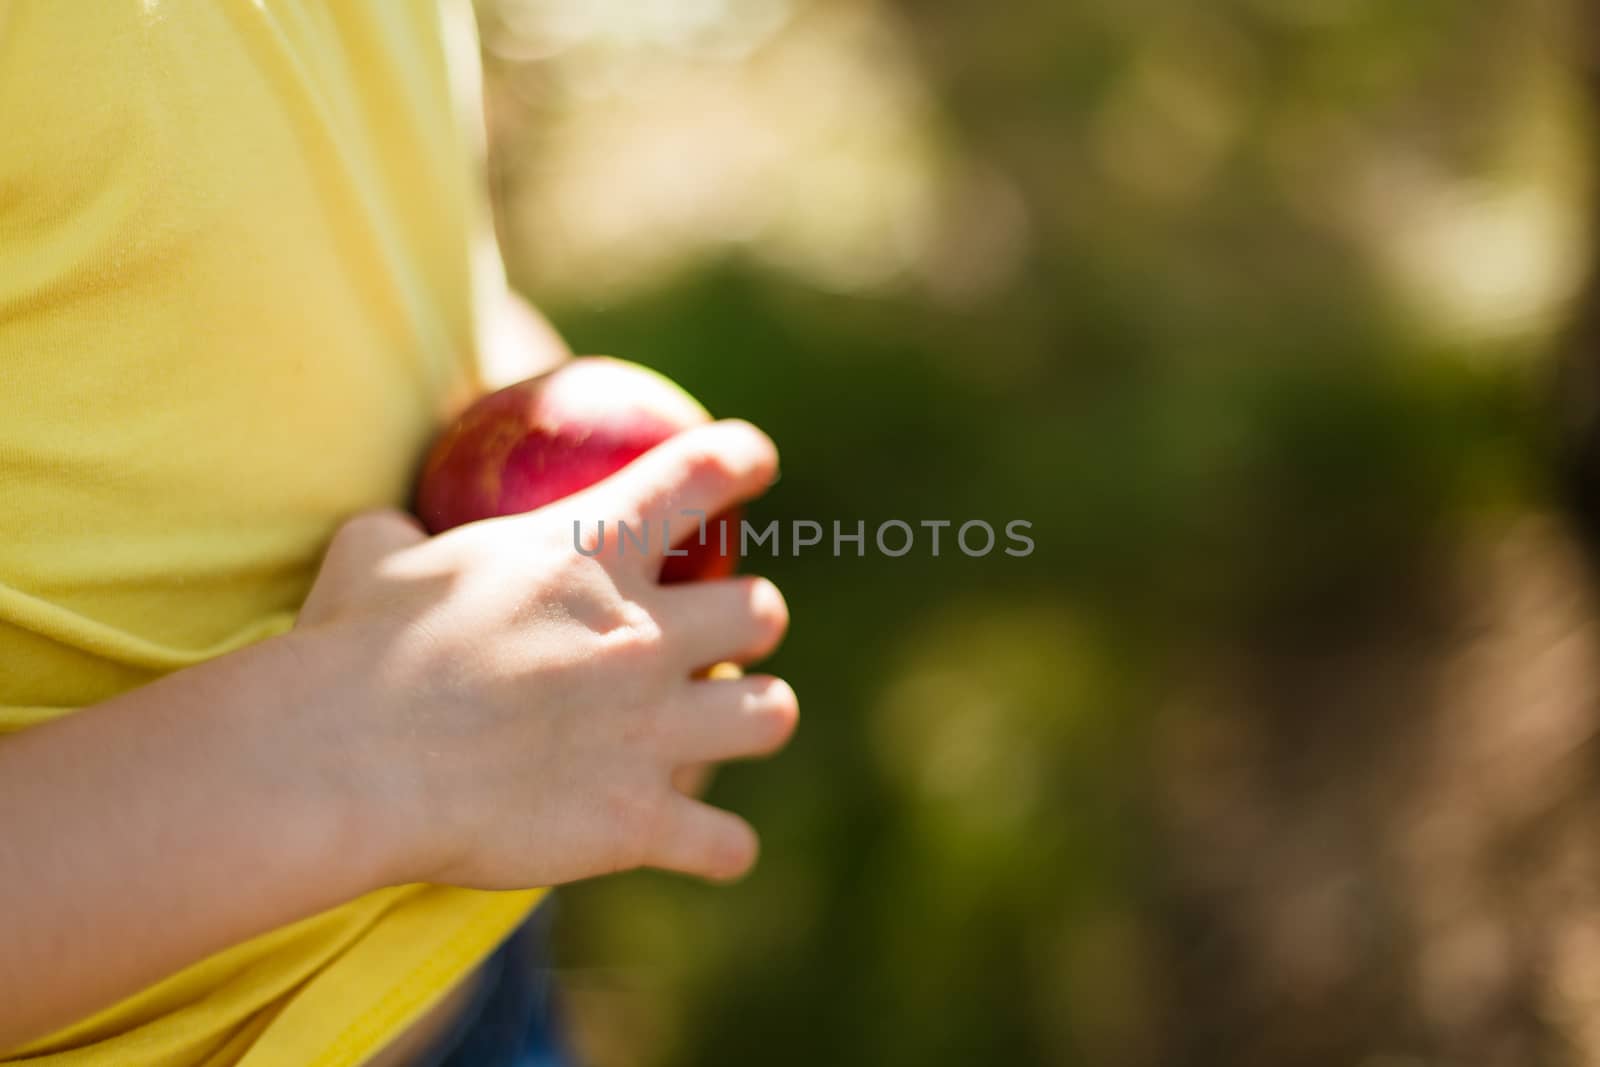 Girl cleaning a red apple on her shirt